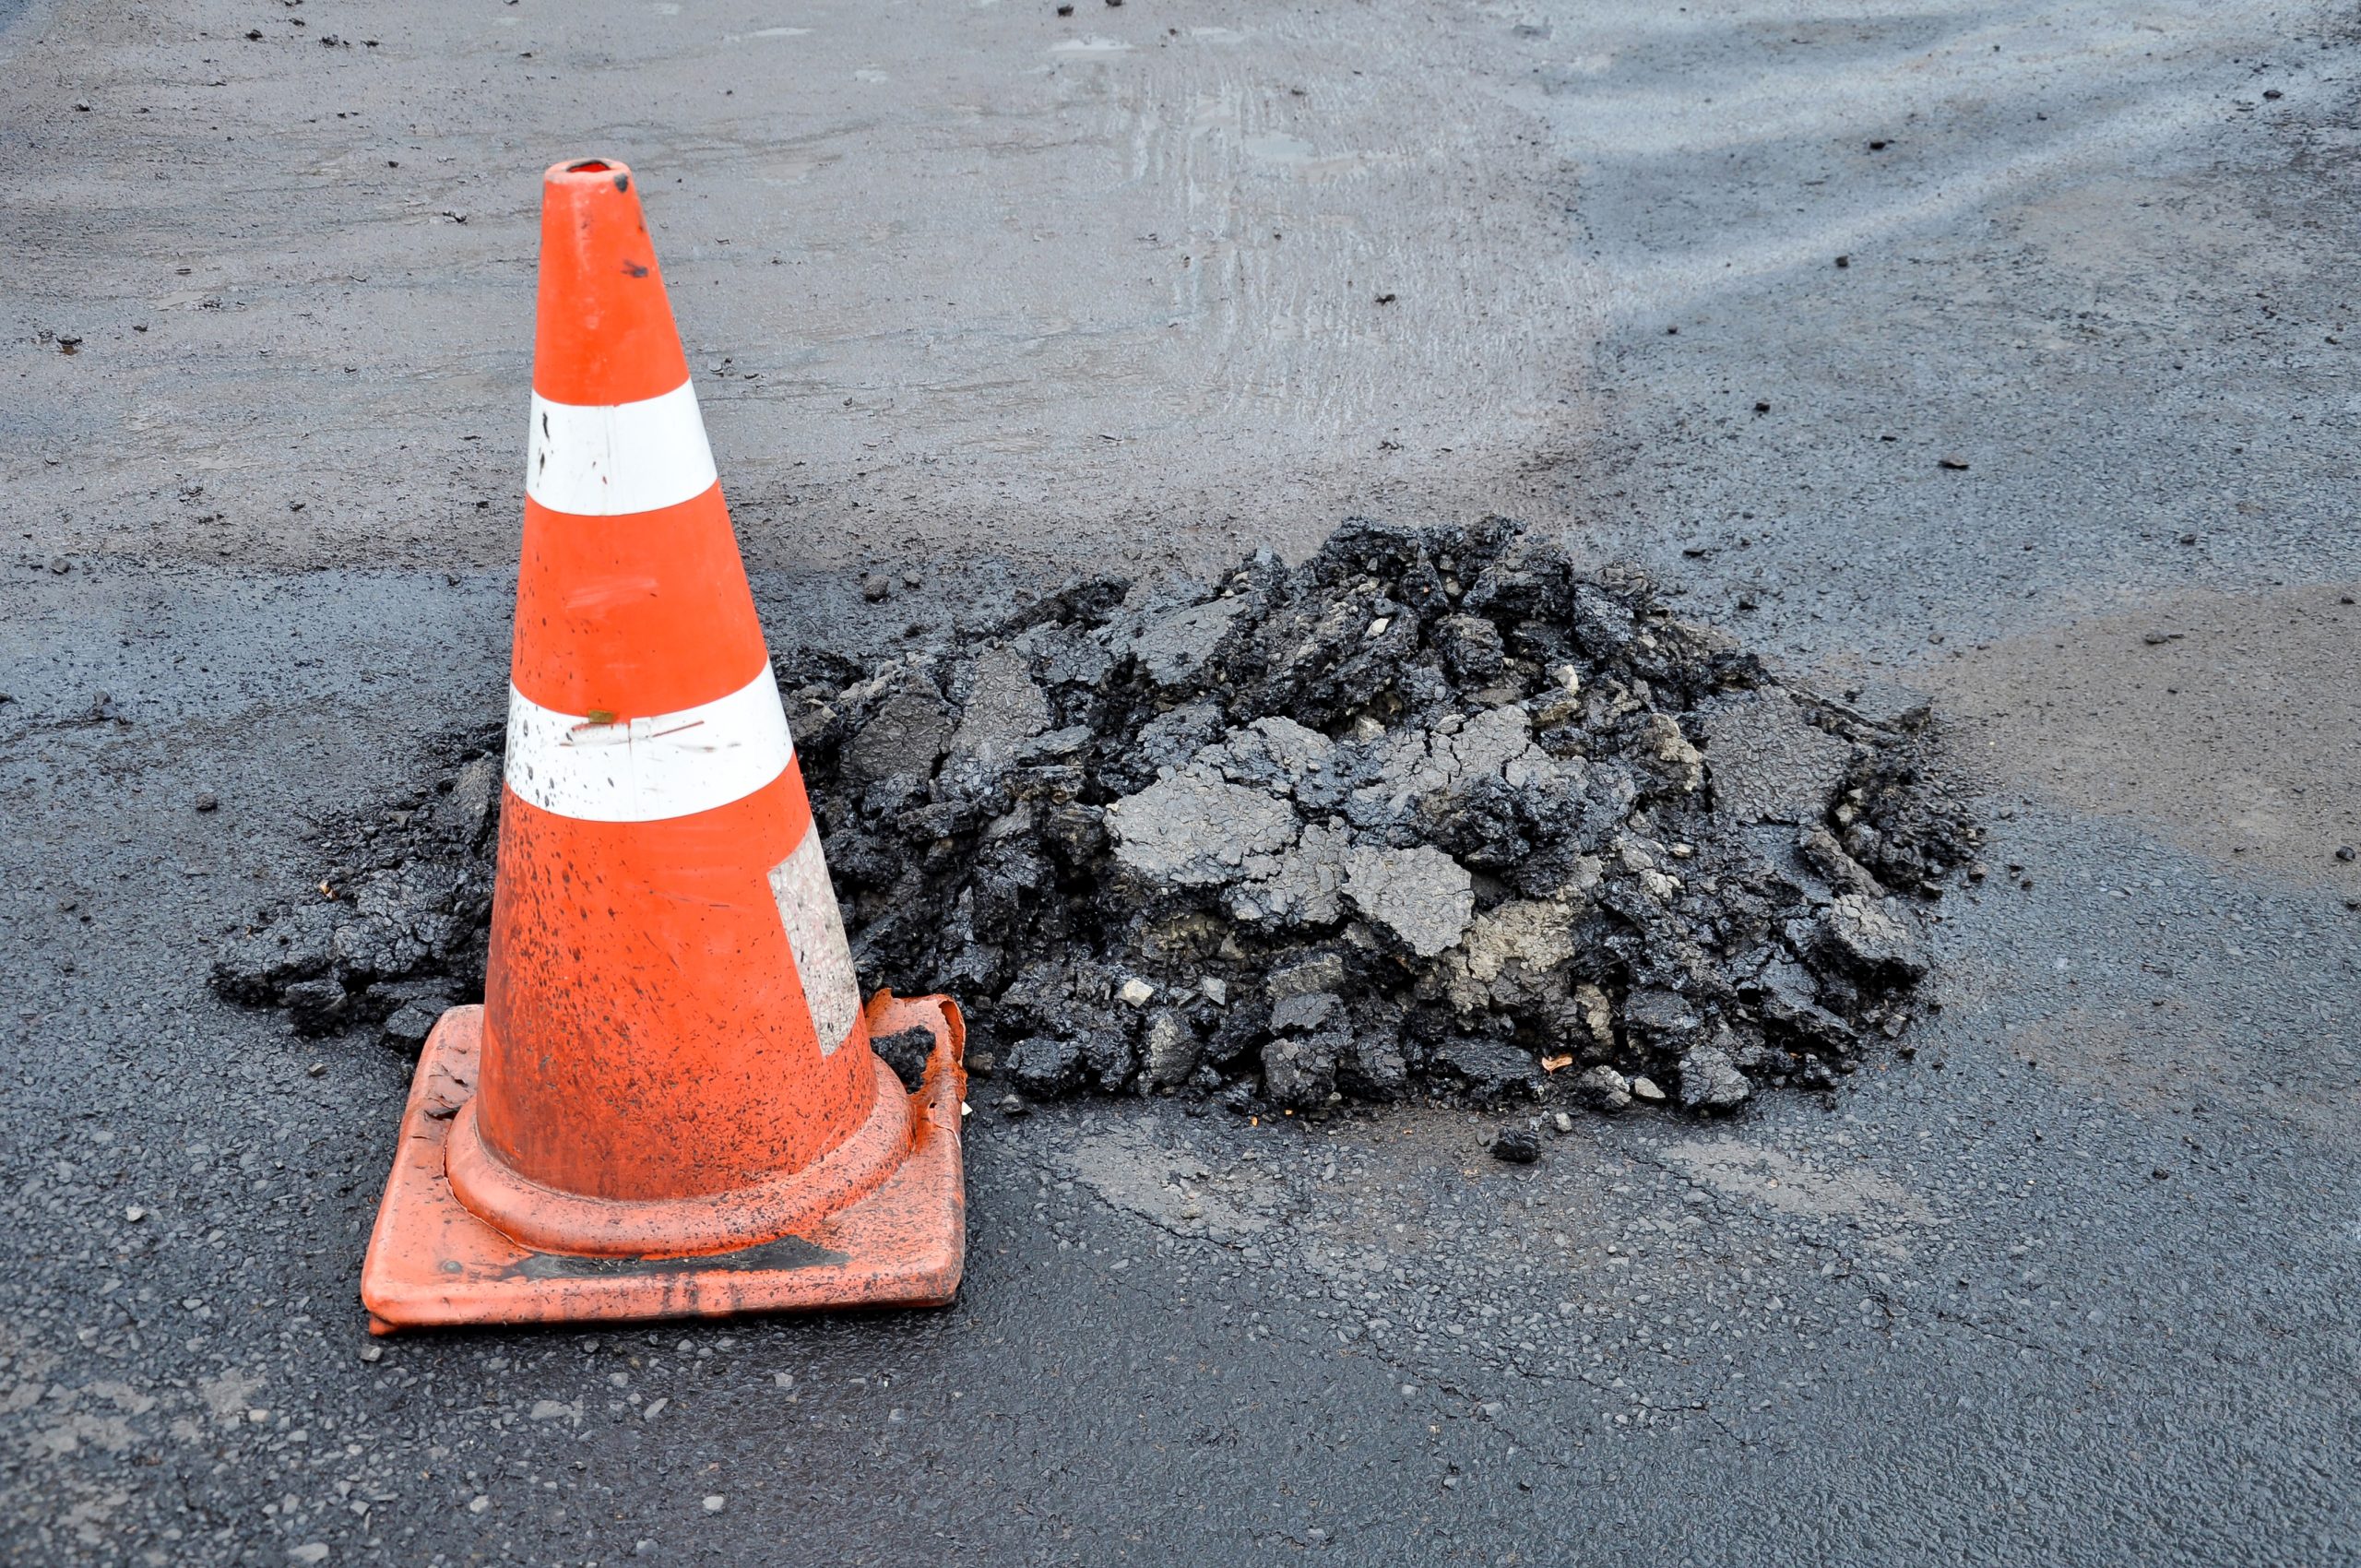 Traffic cones and mounds of asphalt, while road repairs.